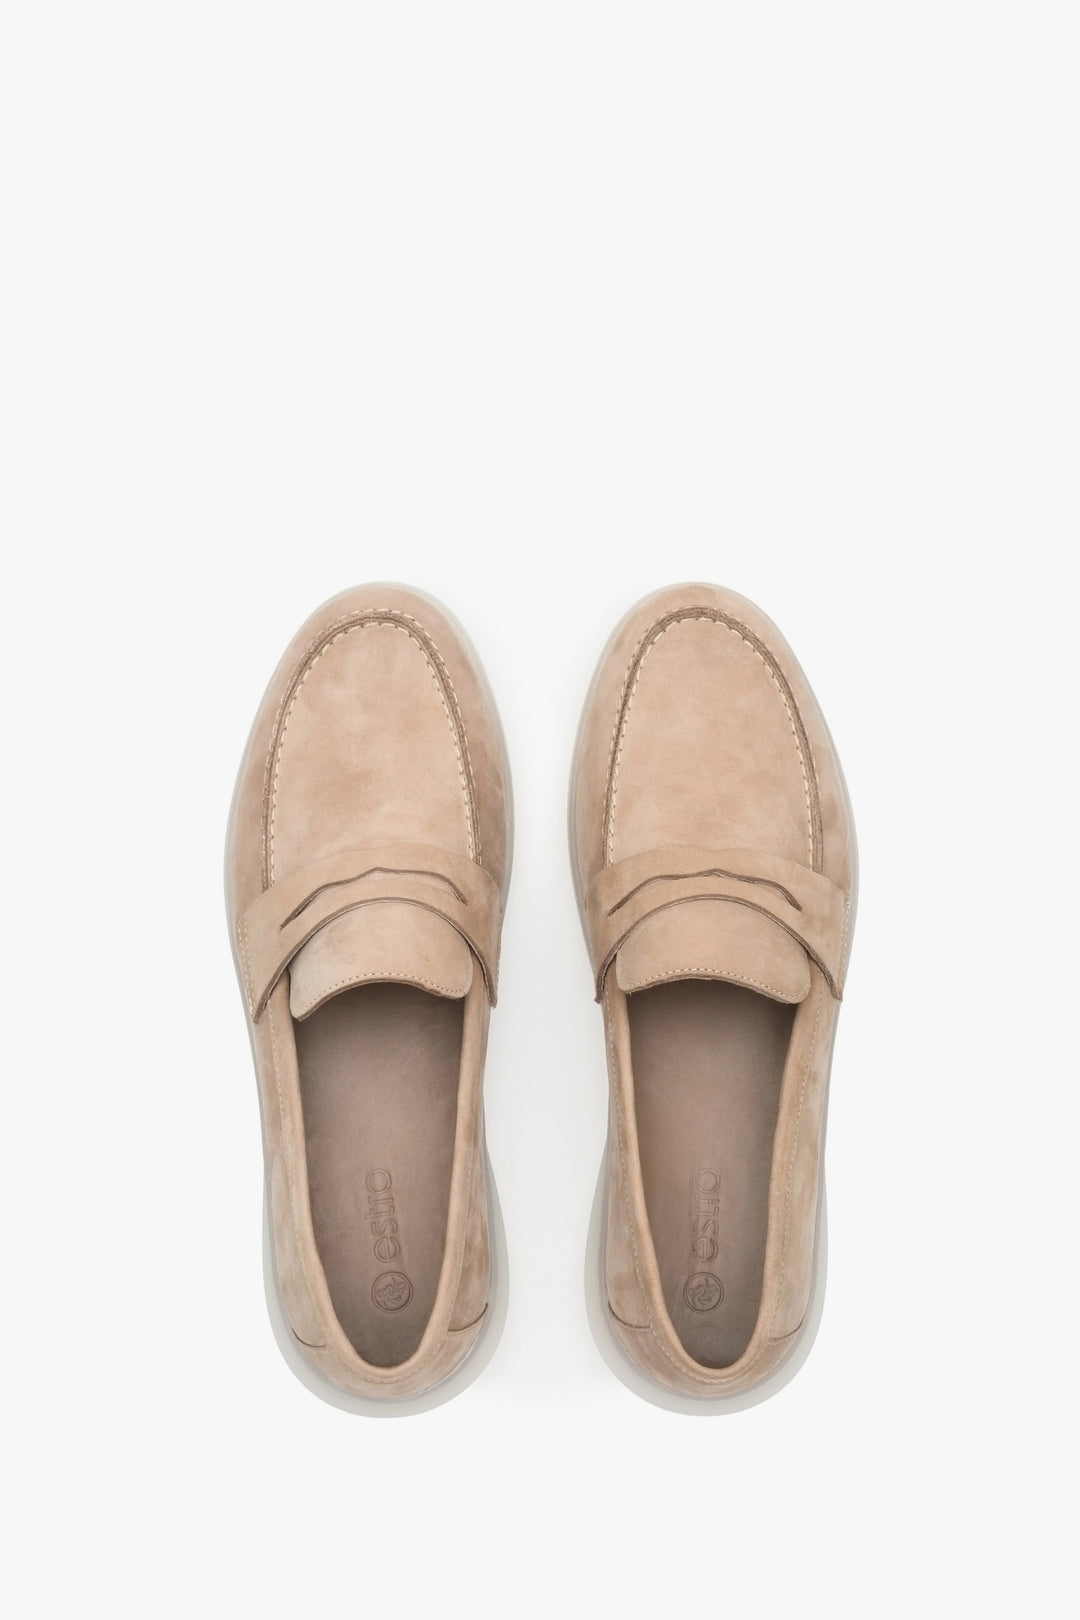 Men's slip-on Estro nubuck leather moccasins - top view of the shoe.